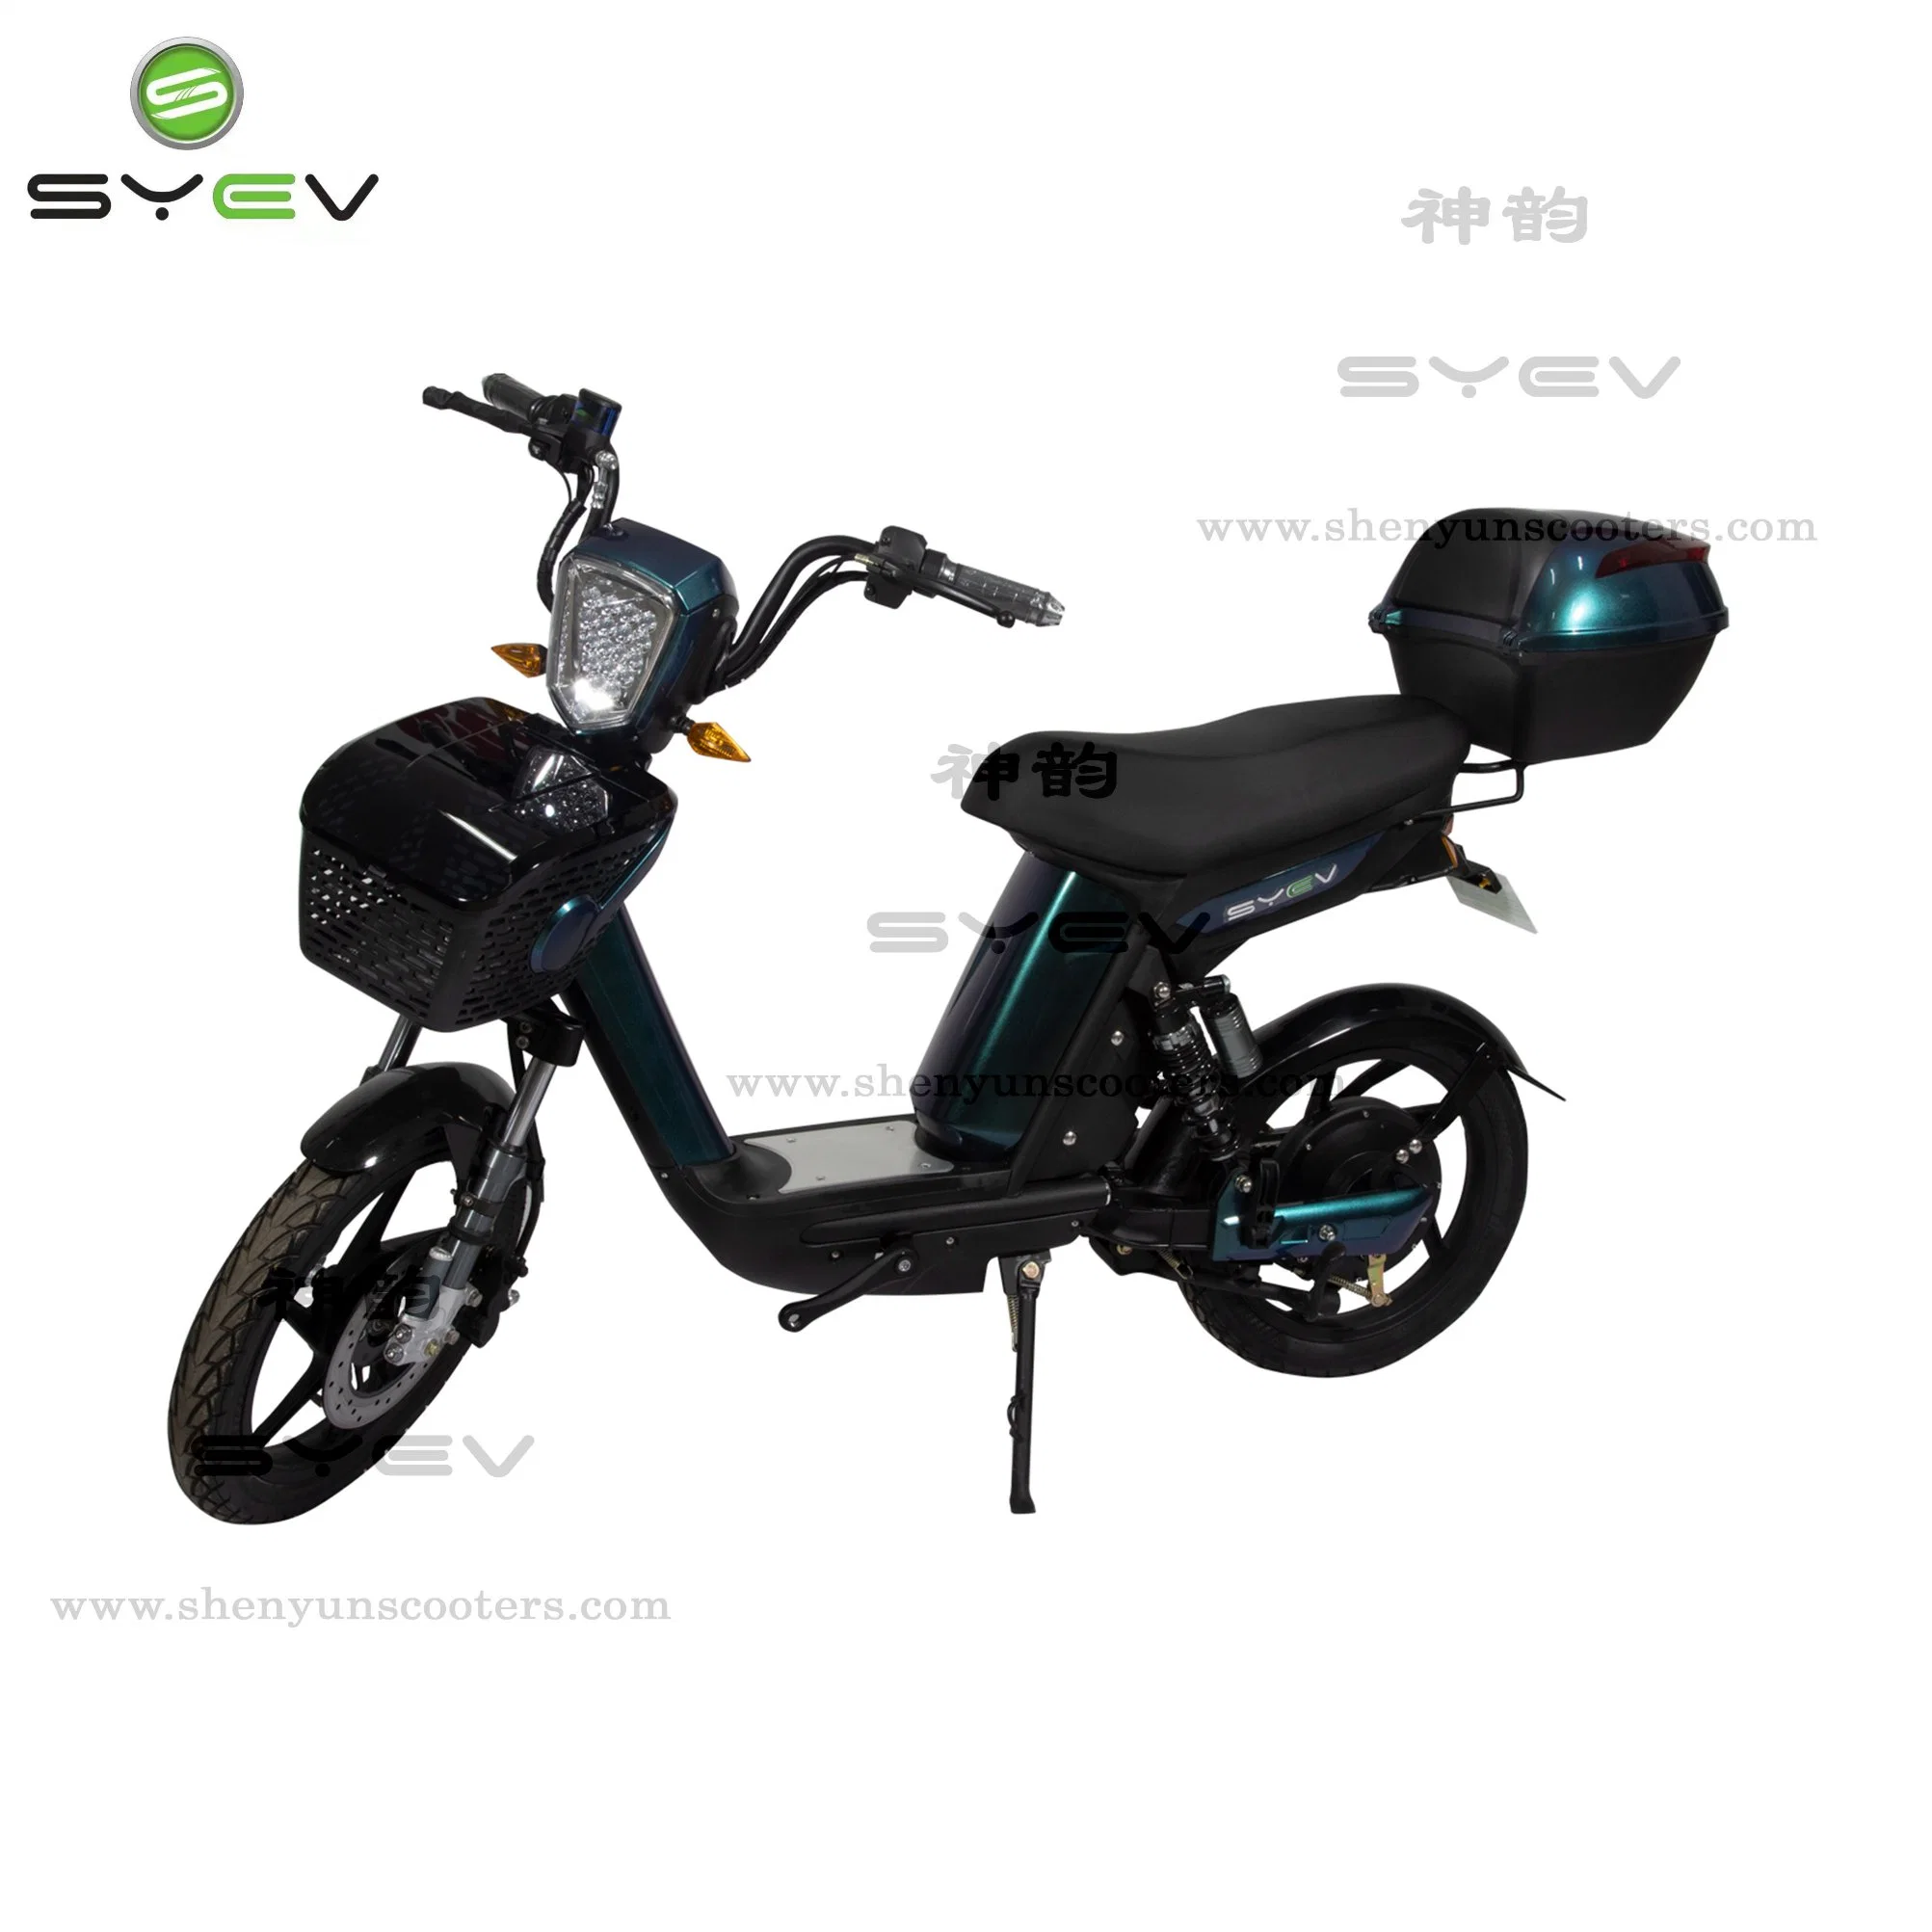 Powerful 800W Electric Scooter with Big Wheel Electric Scooter 48V Electric Motorcycle Brushless Motor